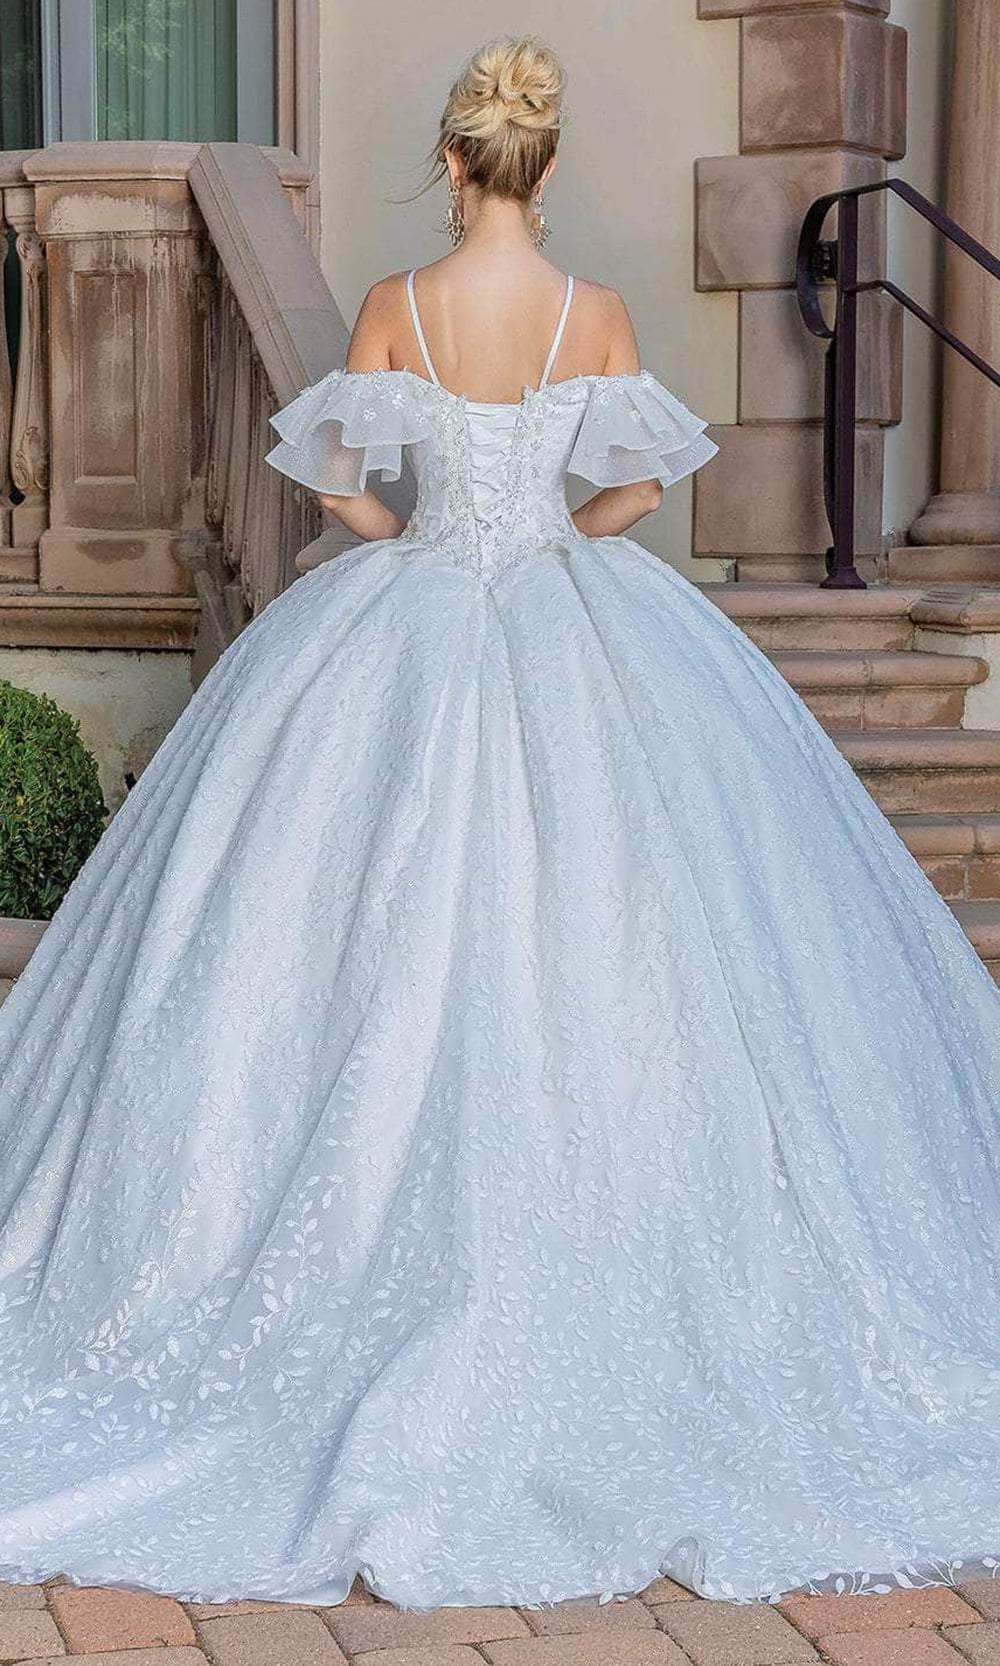 Dancing Queen 0228 - Sweetheart Embroidered Ballgown Quinceanera Dresses  